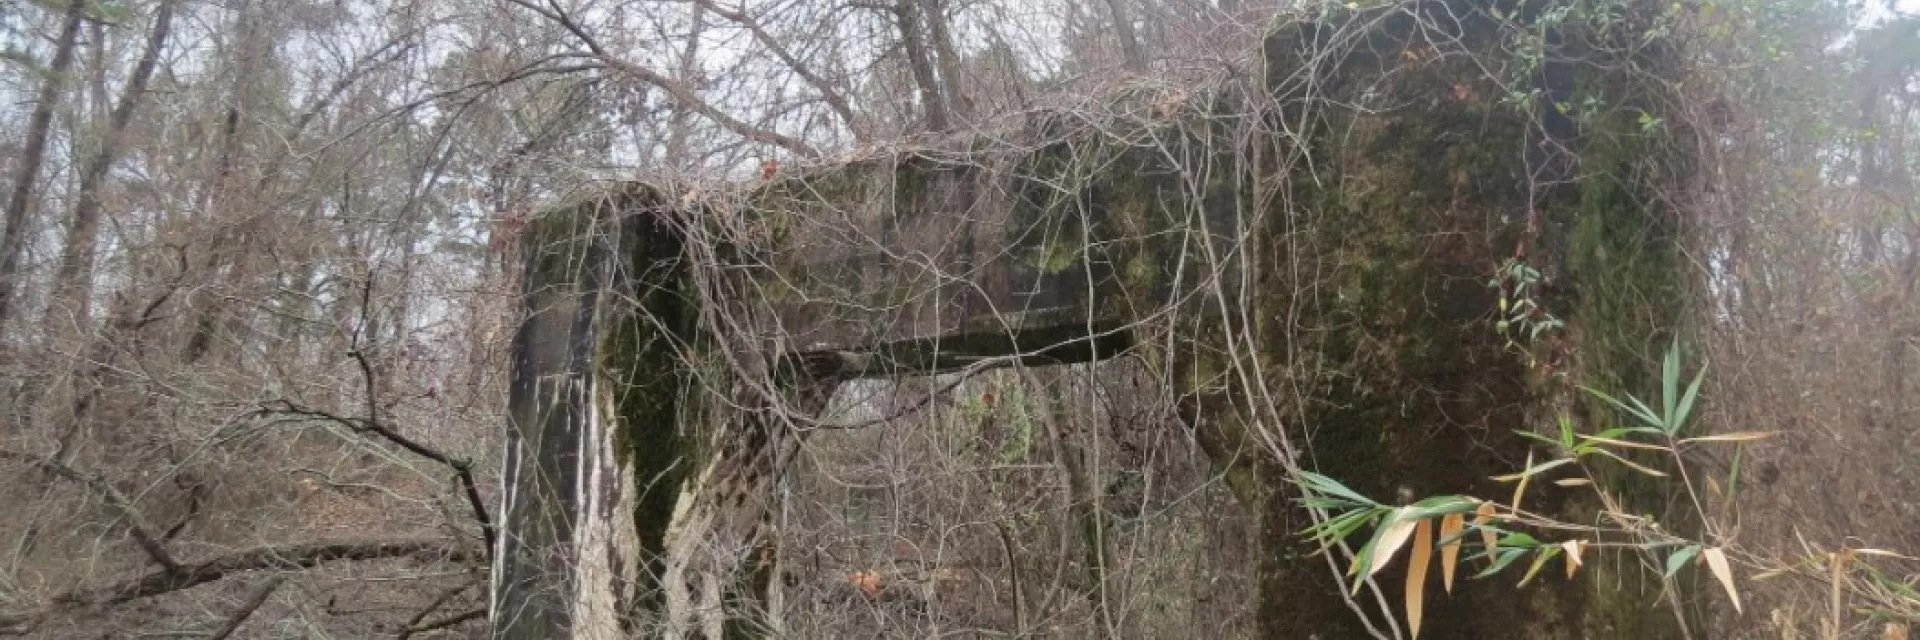 Image of bridge abutment near where the lynching of Ell Persons occurred.